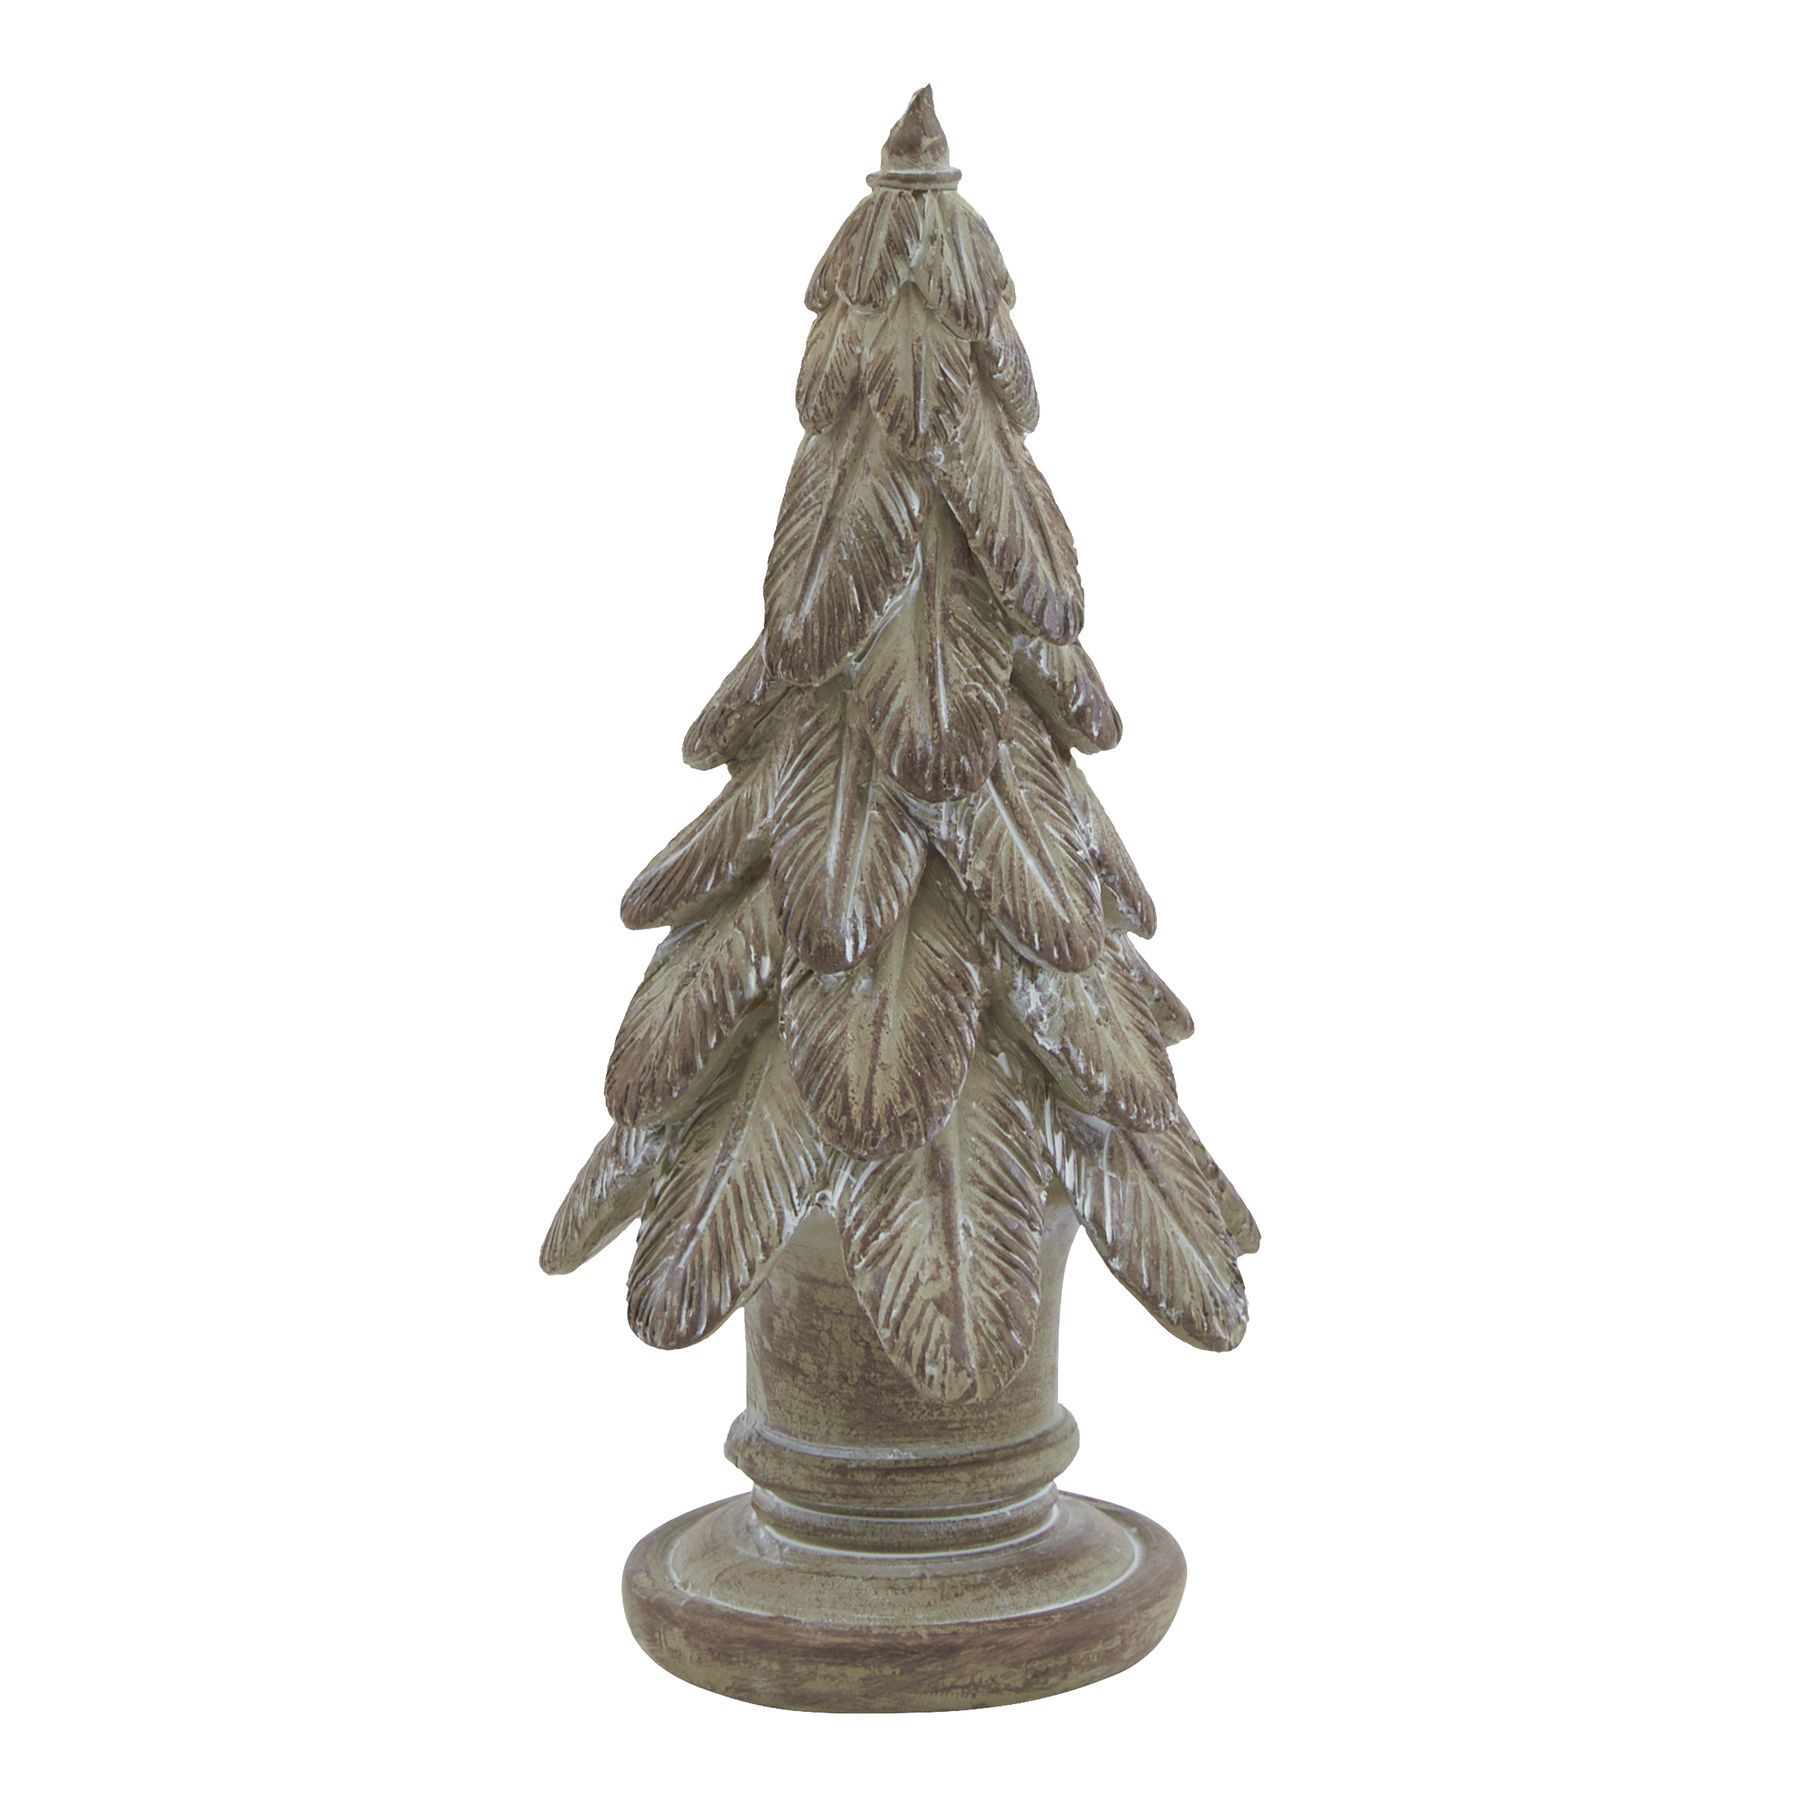 Small Spruce Tree Sculpture - Image 1